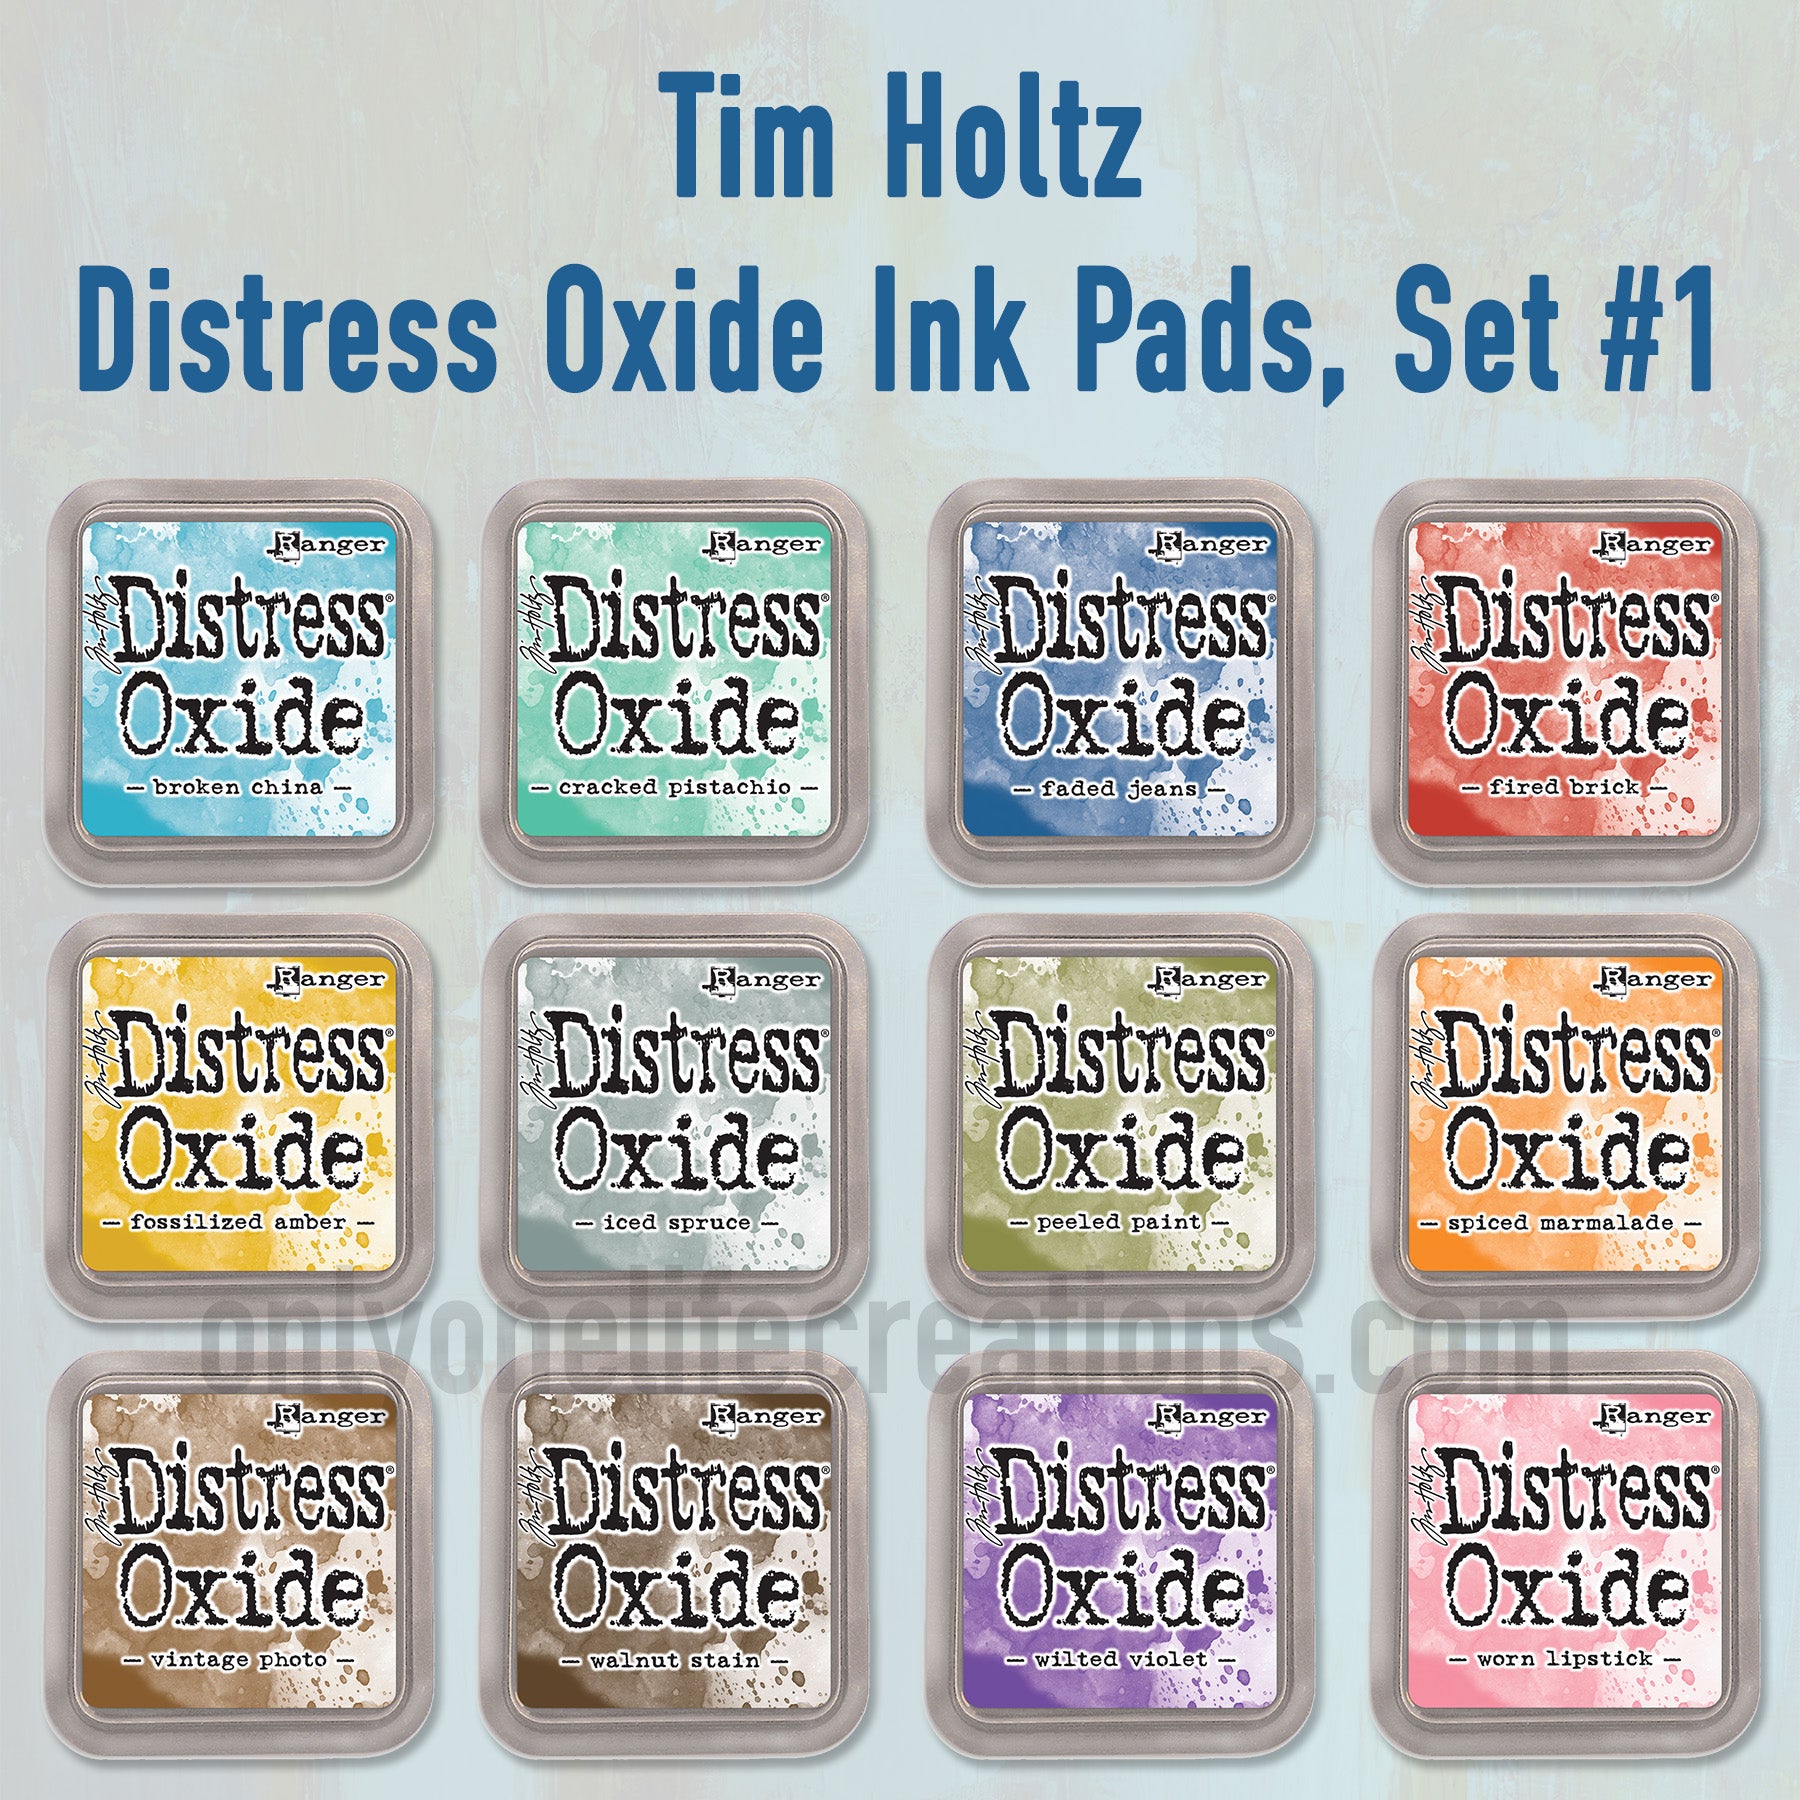 Peeled Paint Distress Oxide Ink Pad Tim Holtz Ranger New Pigment Dye Fusion Ink 